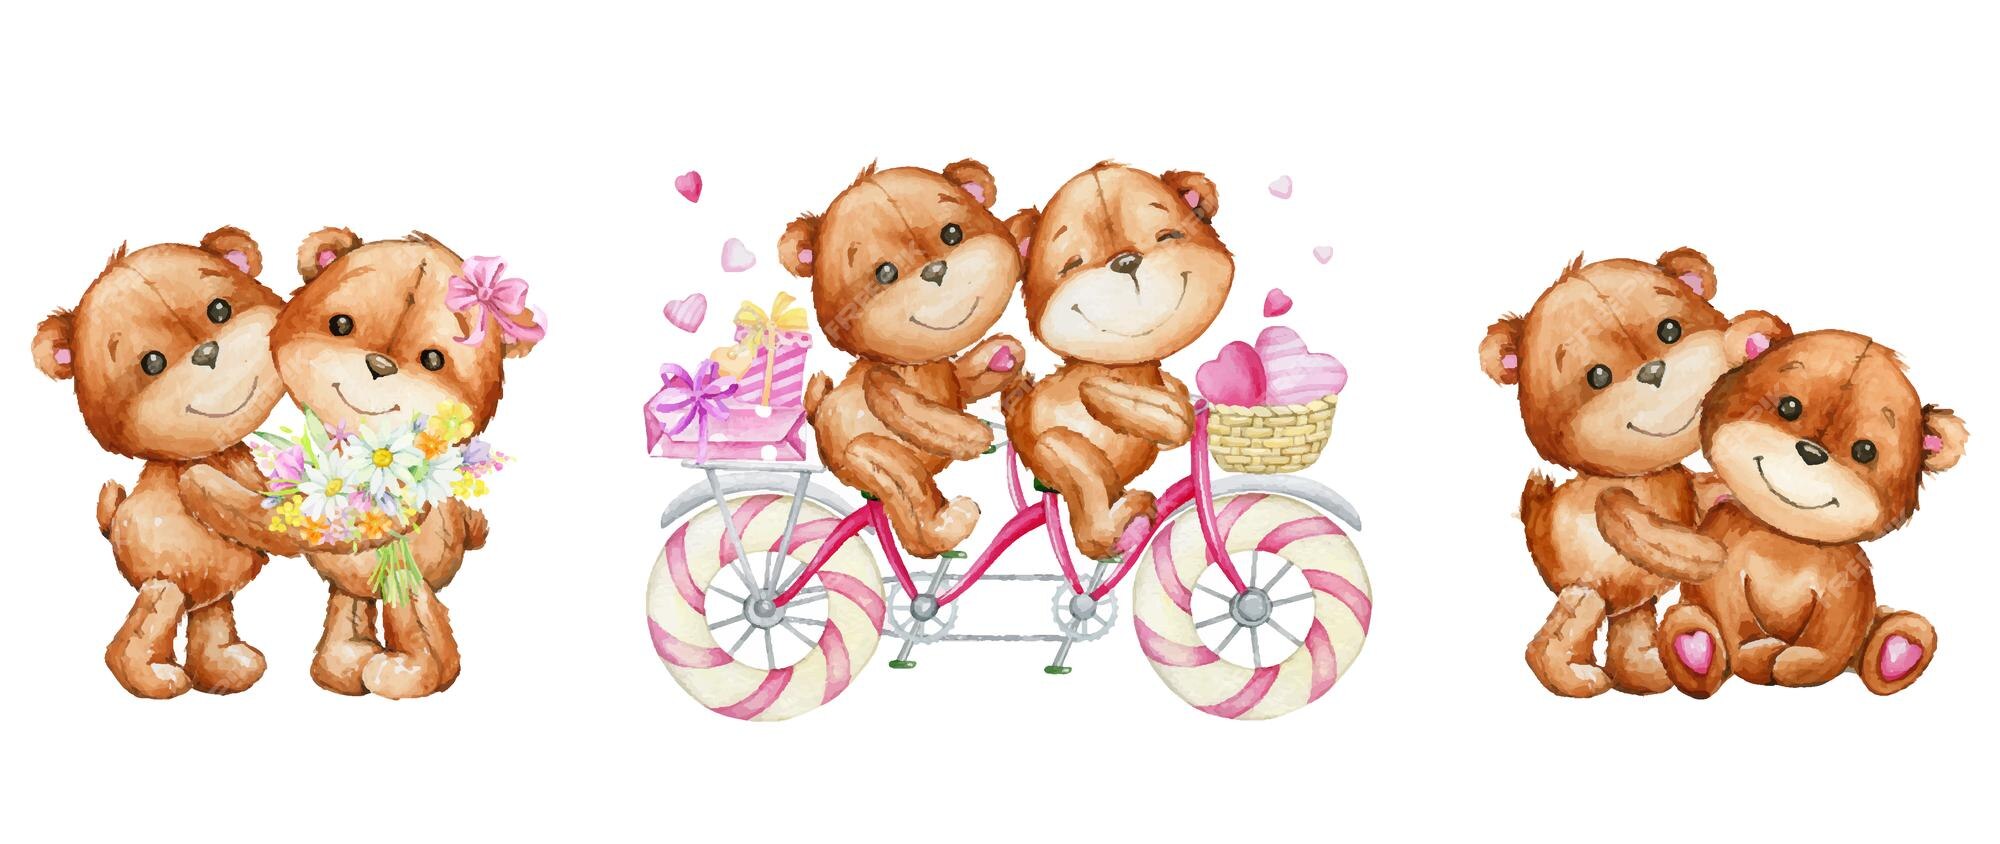 Premium Vector  Cute bears, tandem bike, hearts, gifts, letter. watercolor  set of elements in cartoon style on an isolated background.